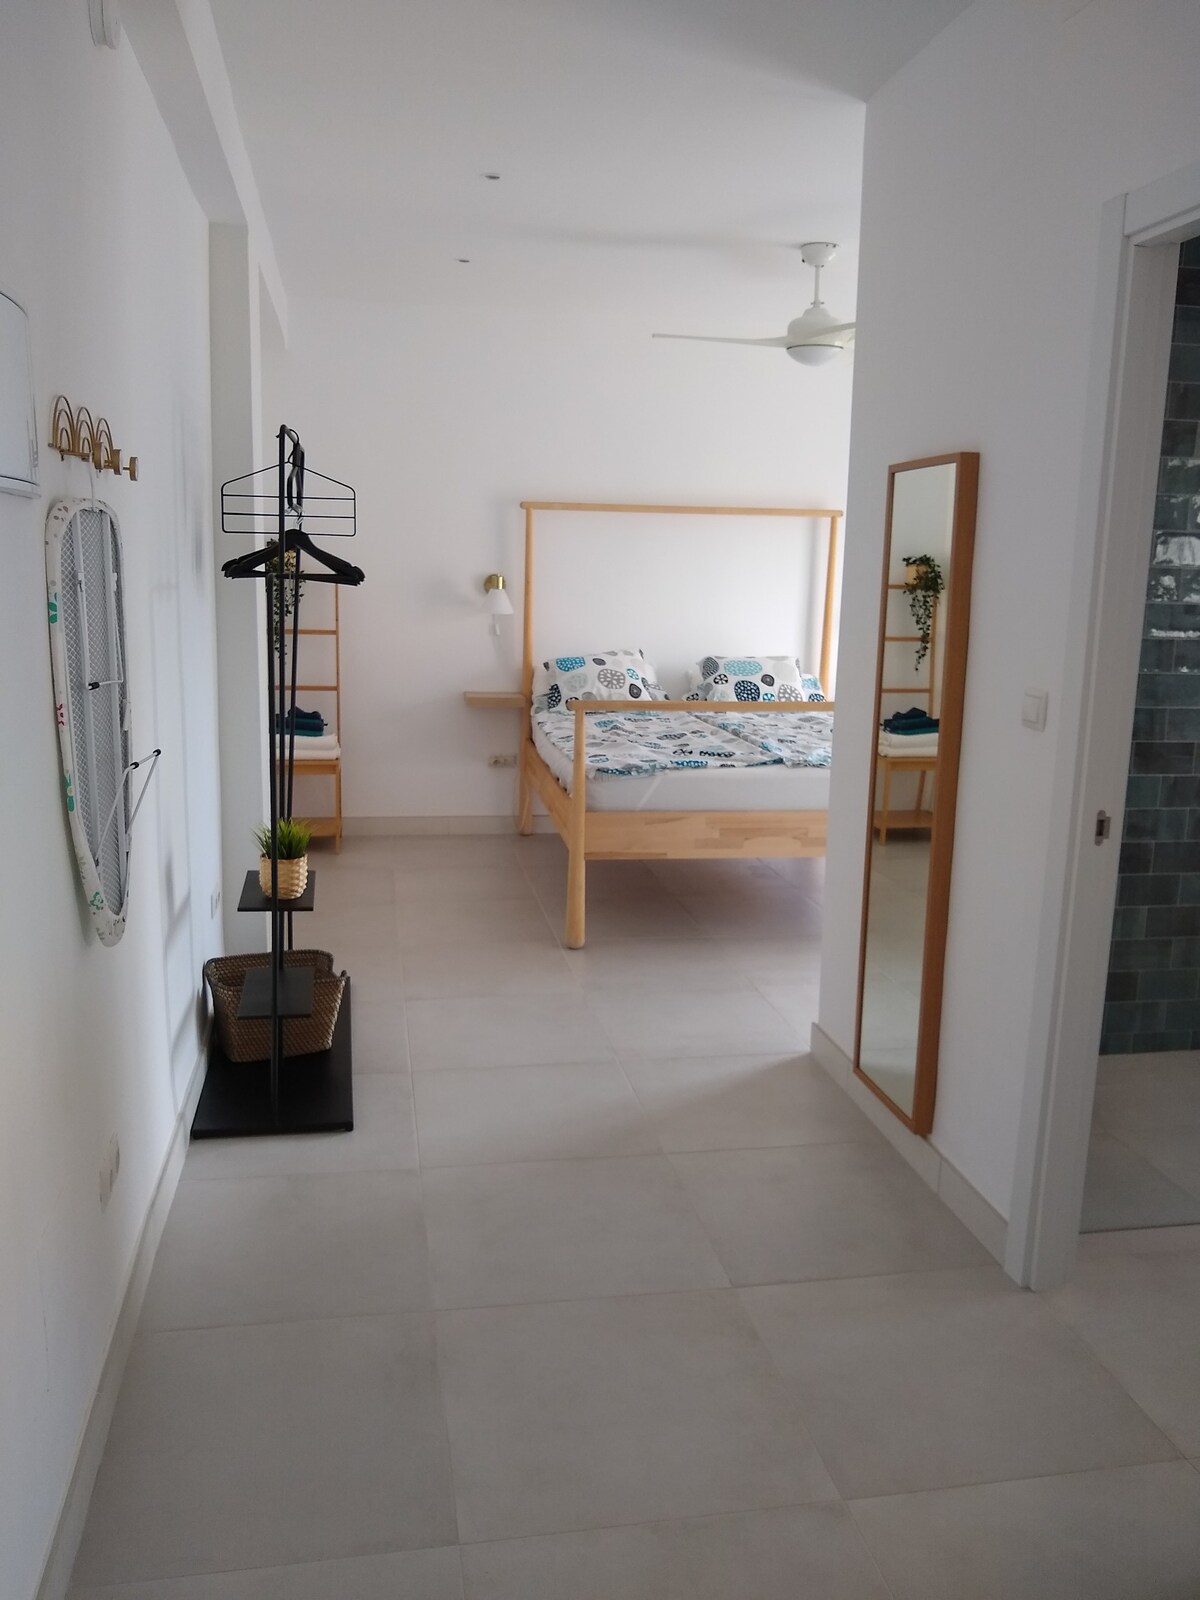 Great flat in Fuengirola, very close to the beach